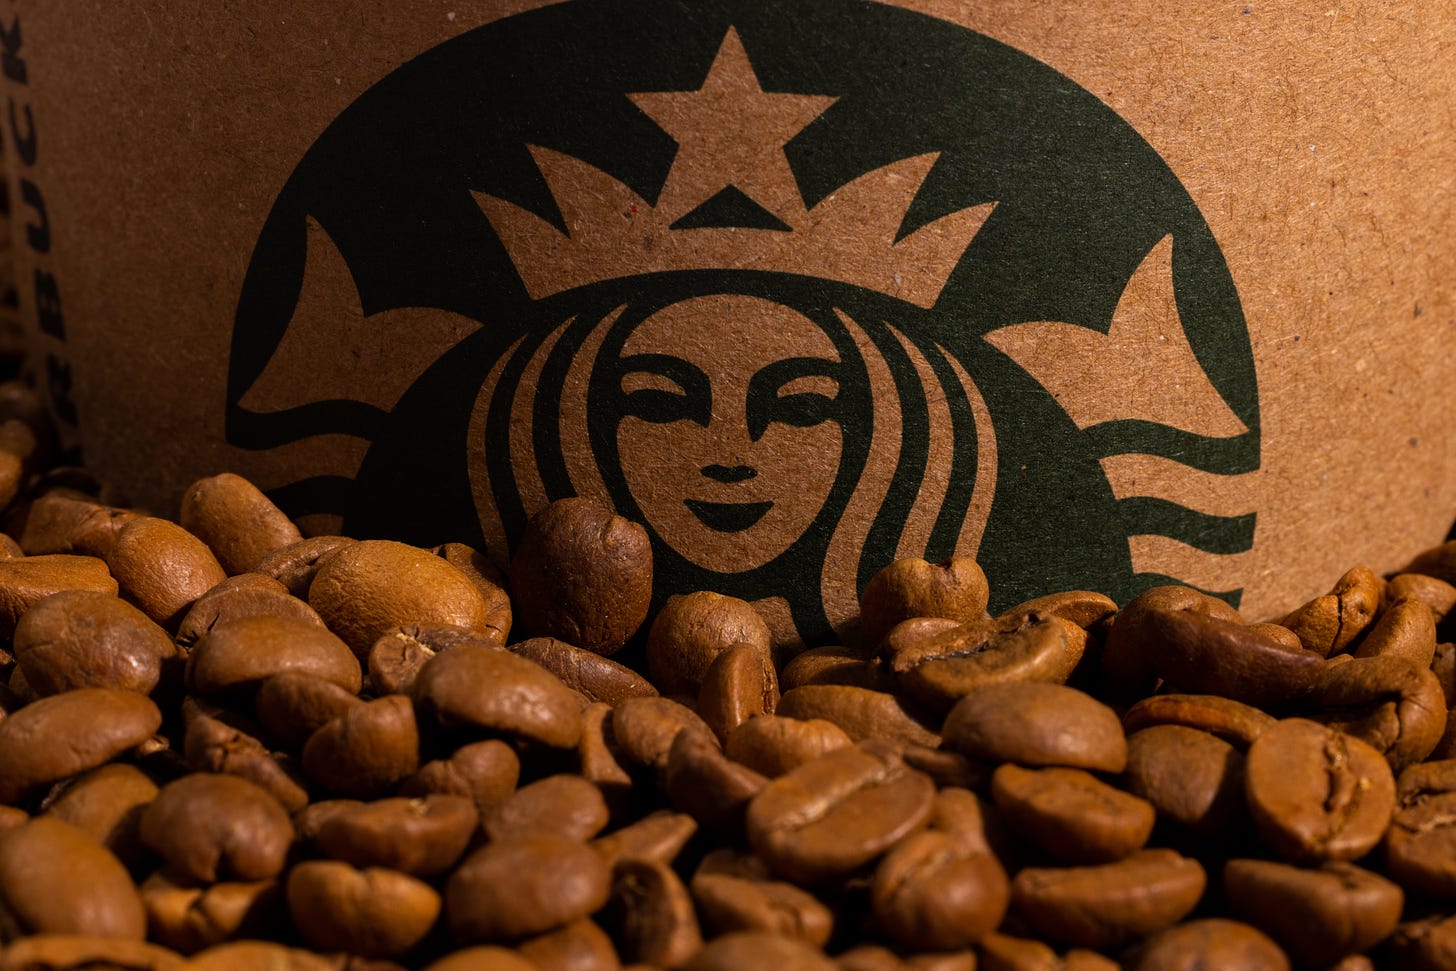 a close up of the green starbucks siren on a cardboard background with coffee beans